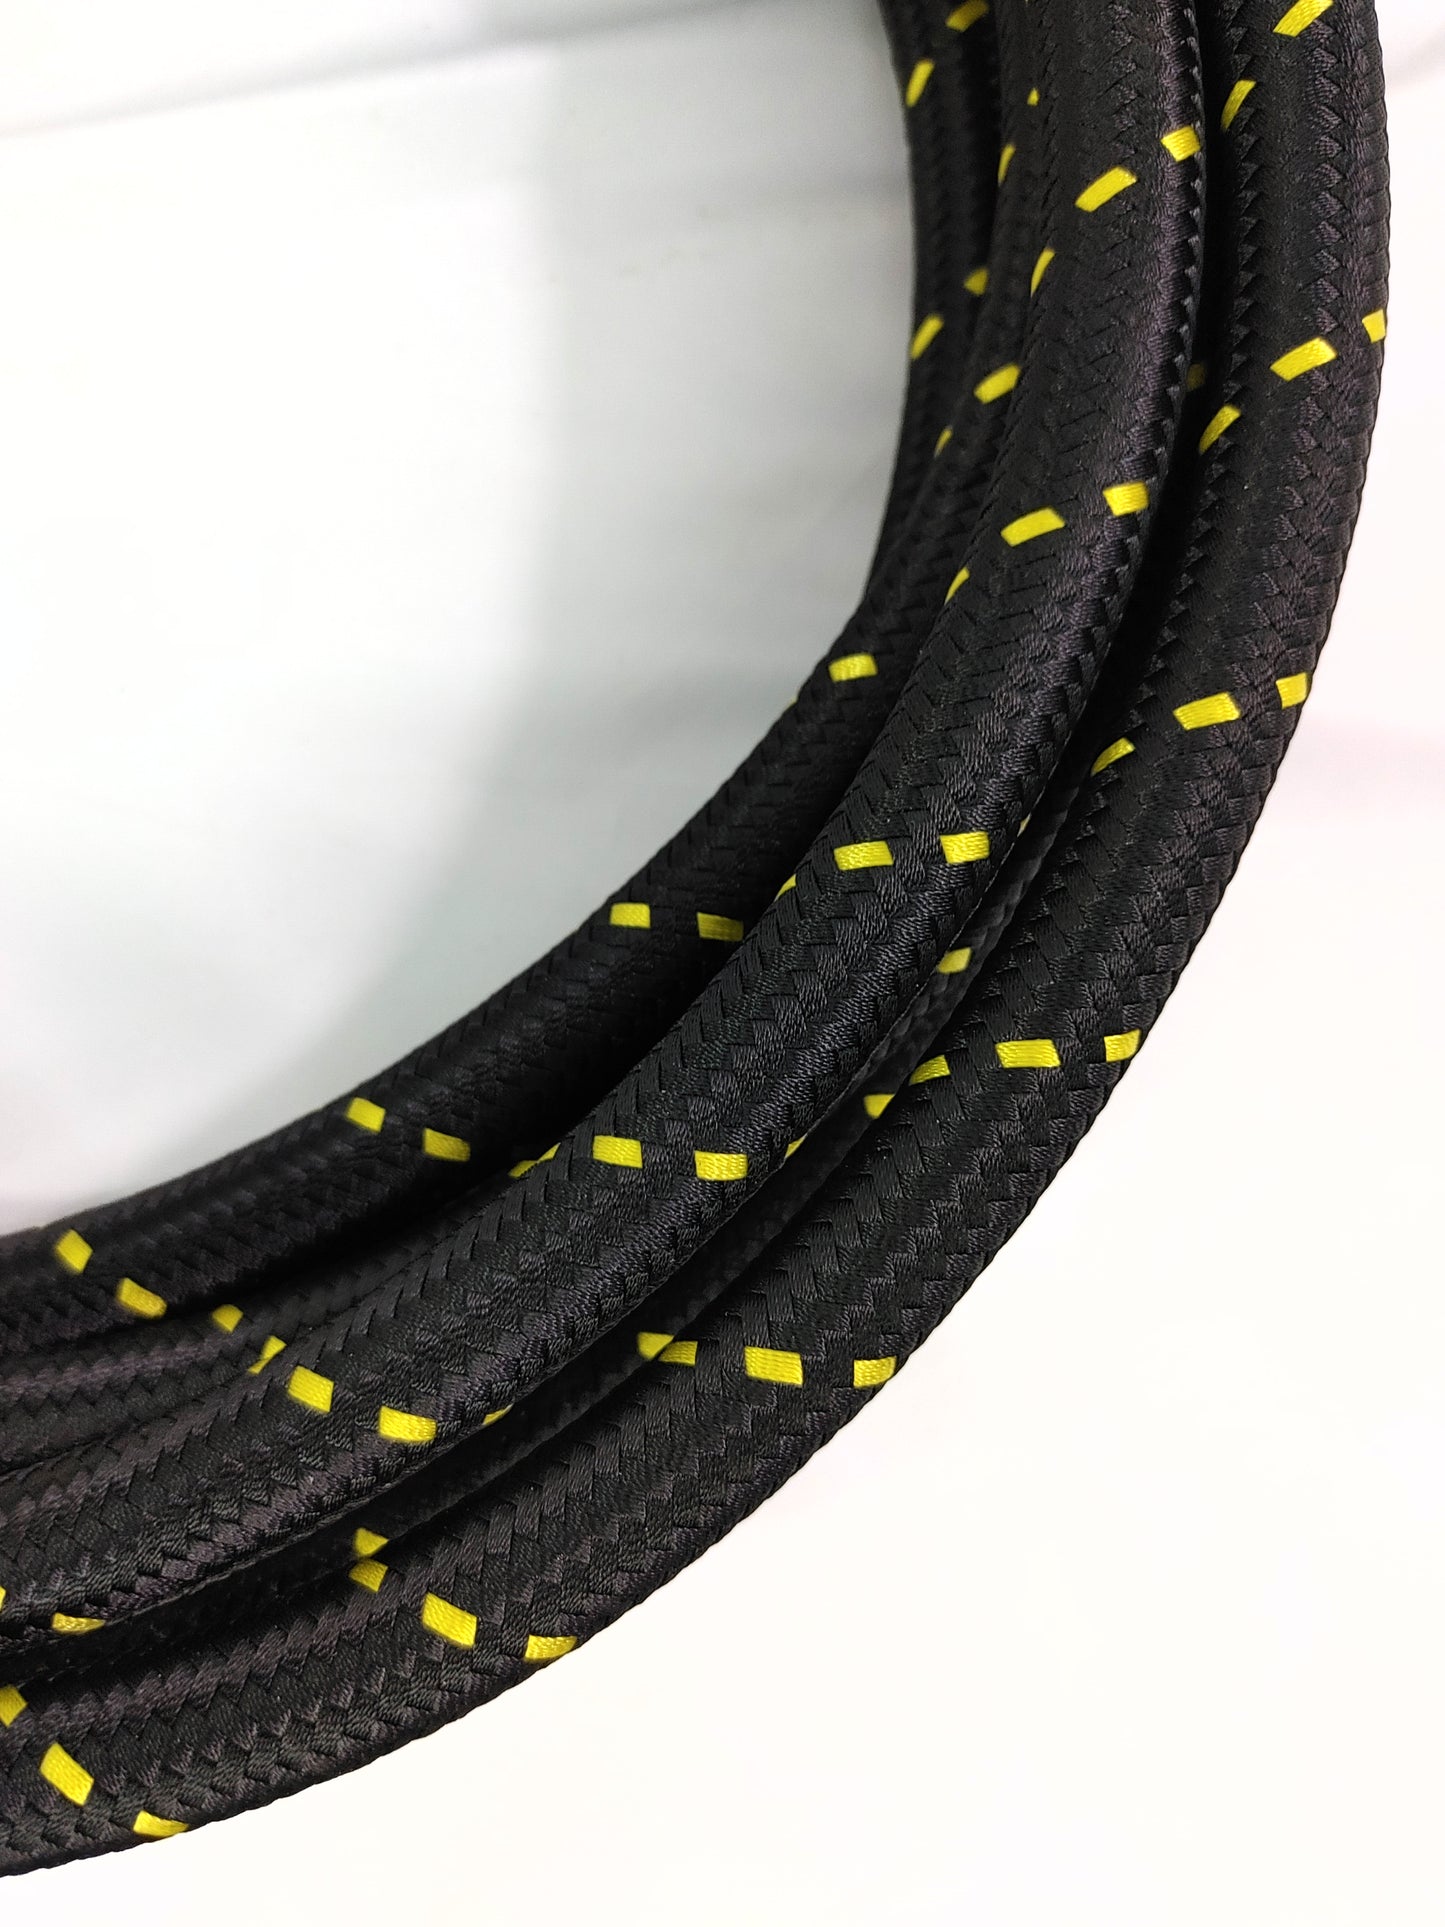 PTFE lined Black Nylon with Yellow Check braided hose - AN6, AN8, AN10